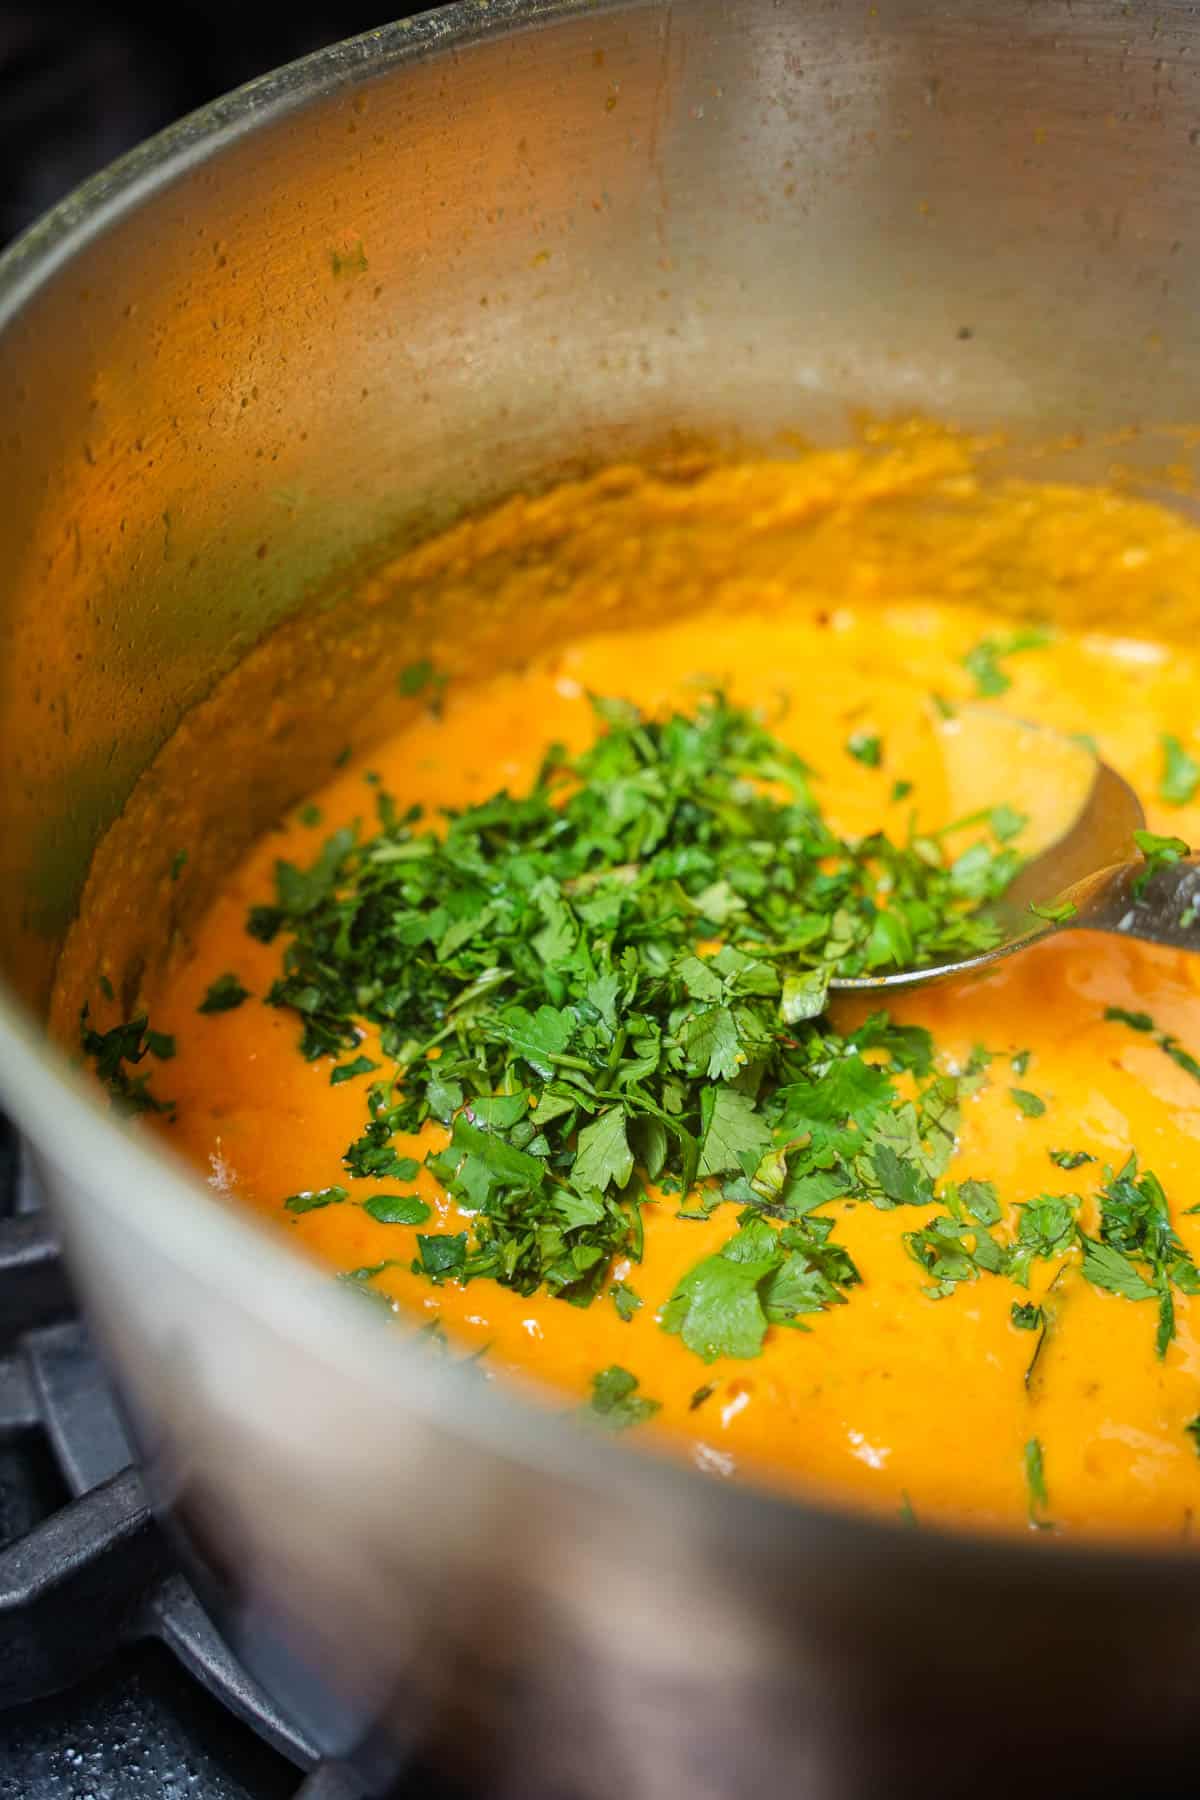 Cilantro added to the curry in a stainless pot on the stove.